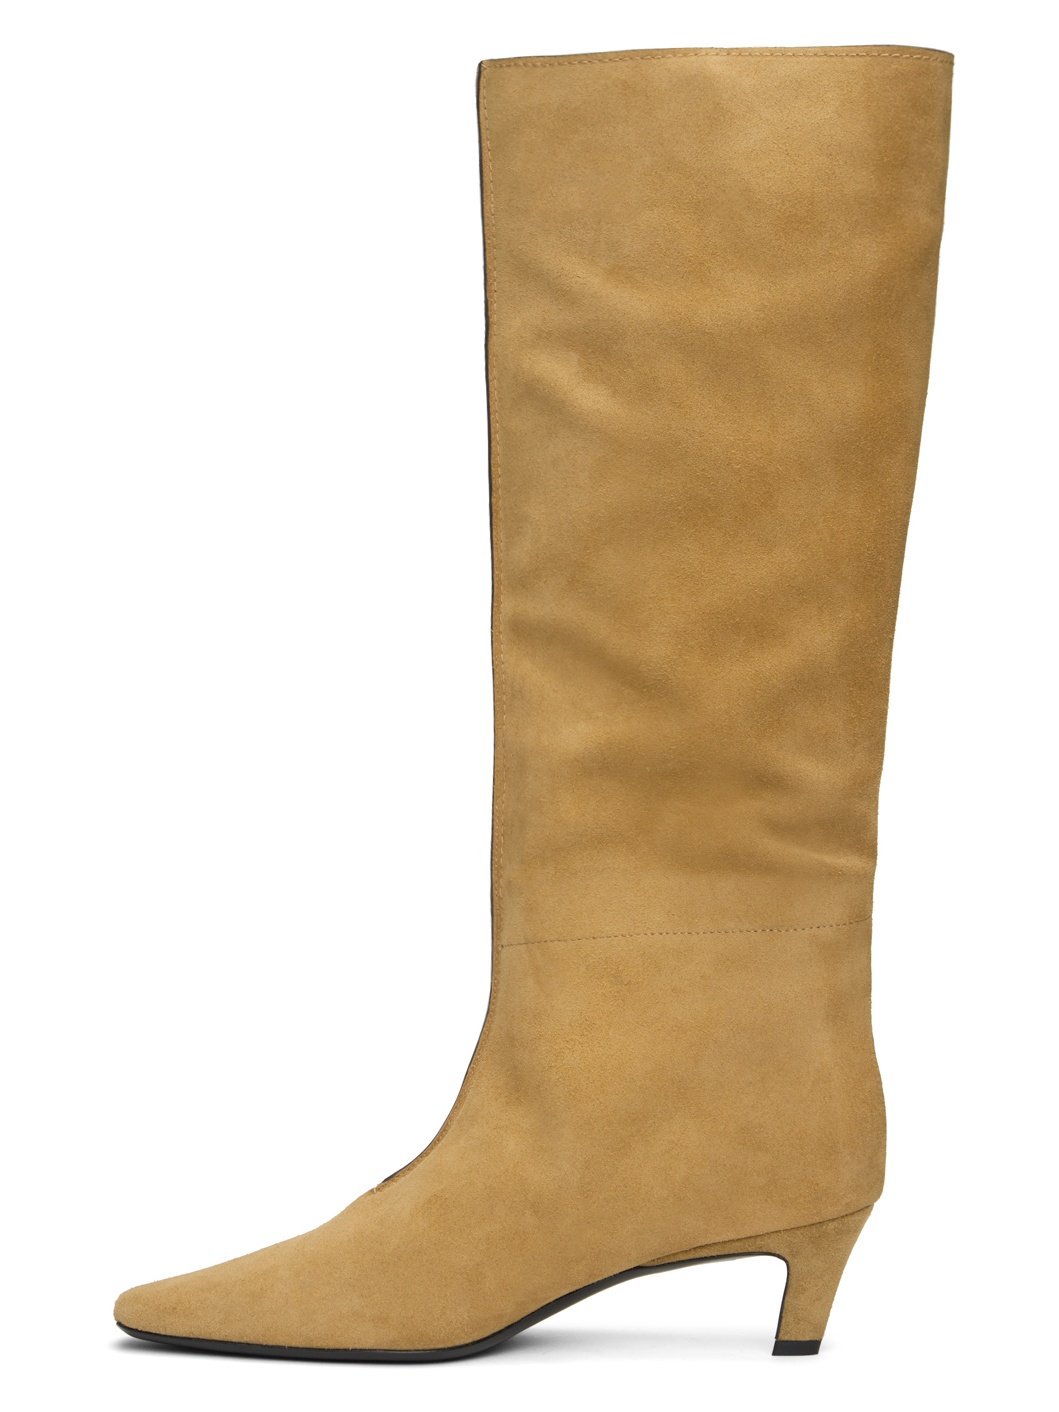 Tan 'The Wide Shaft' Boots - 3